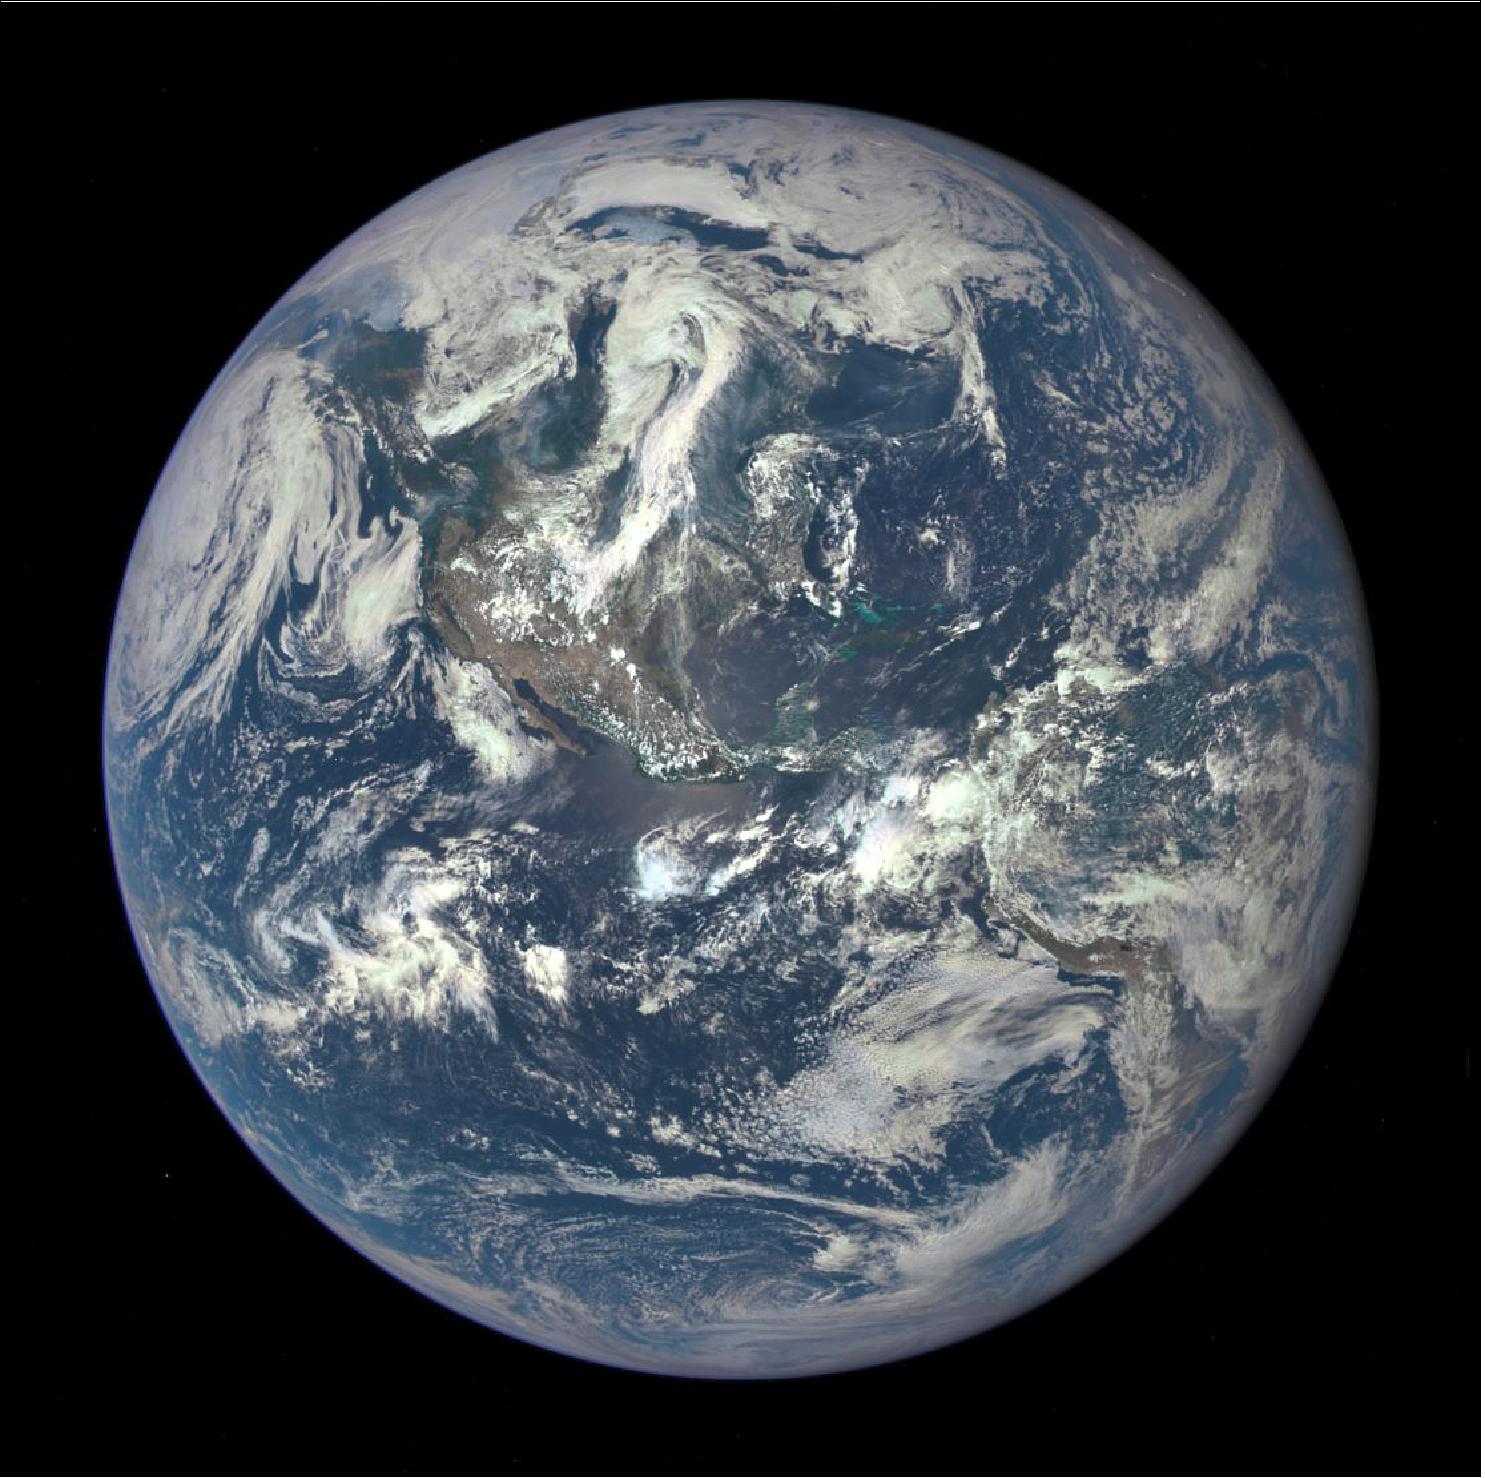 Figure 37: Earth as seen on July 6, 2015 from a distance of one million miles by NASA's EPIC instrument aboard NOAA's DSCOVR (Deep Space Climate Observatory) spacecraft (image credit: NASA)